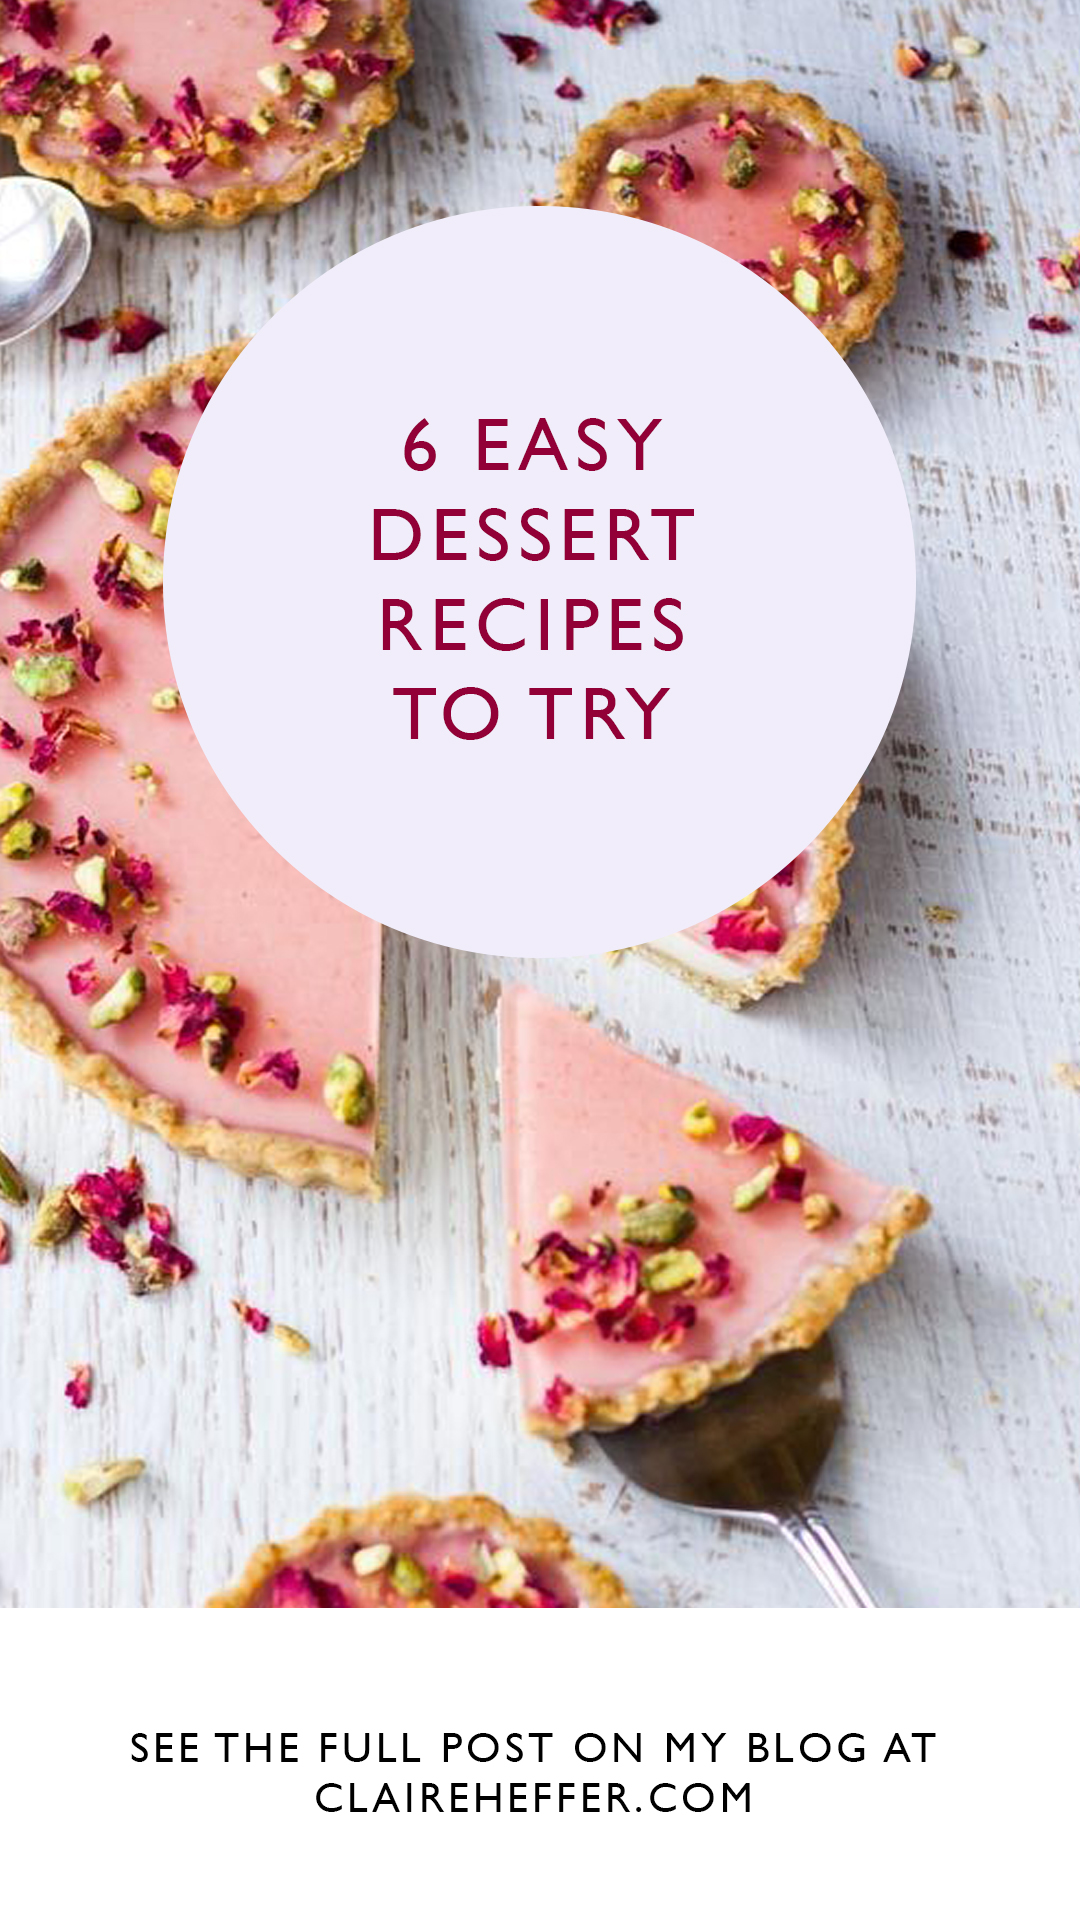 Easy dessert recipes to end any successful dinner party - Focus on: Dessert. Find more on my blog at claireheffer.com